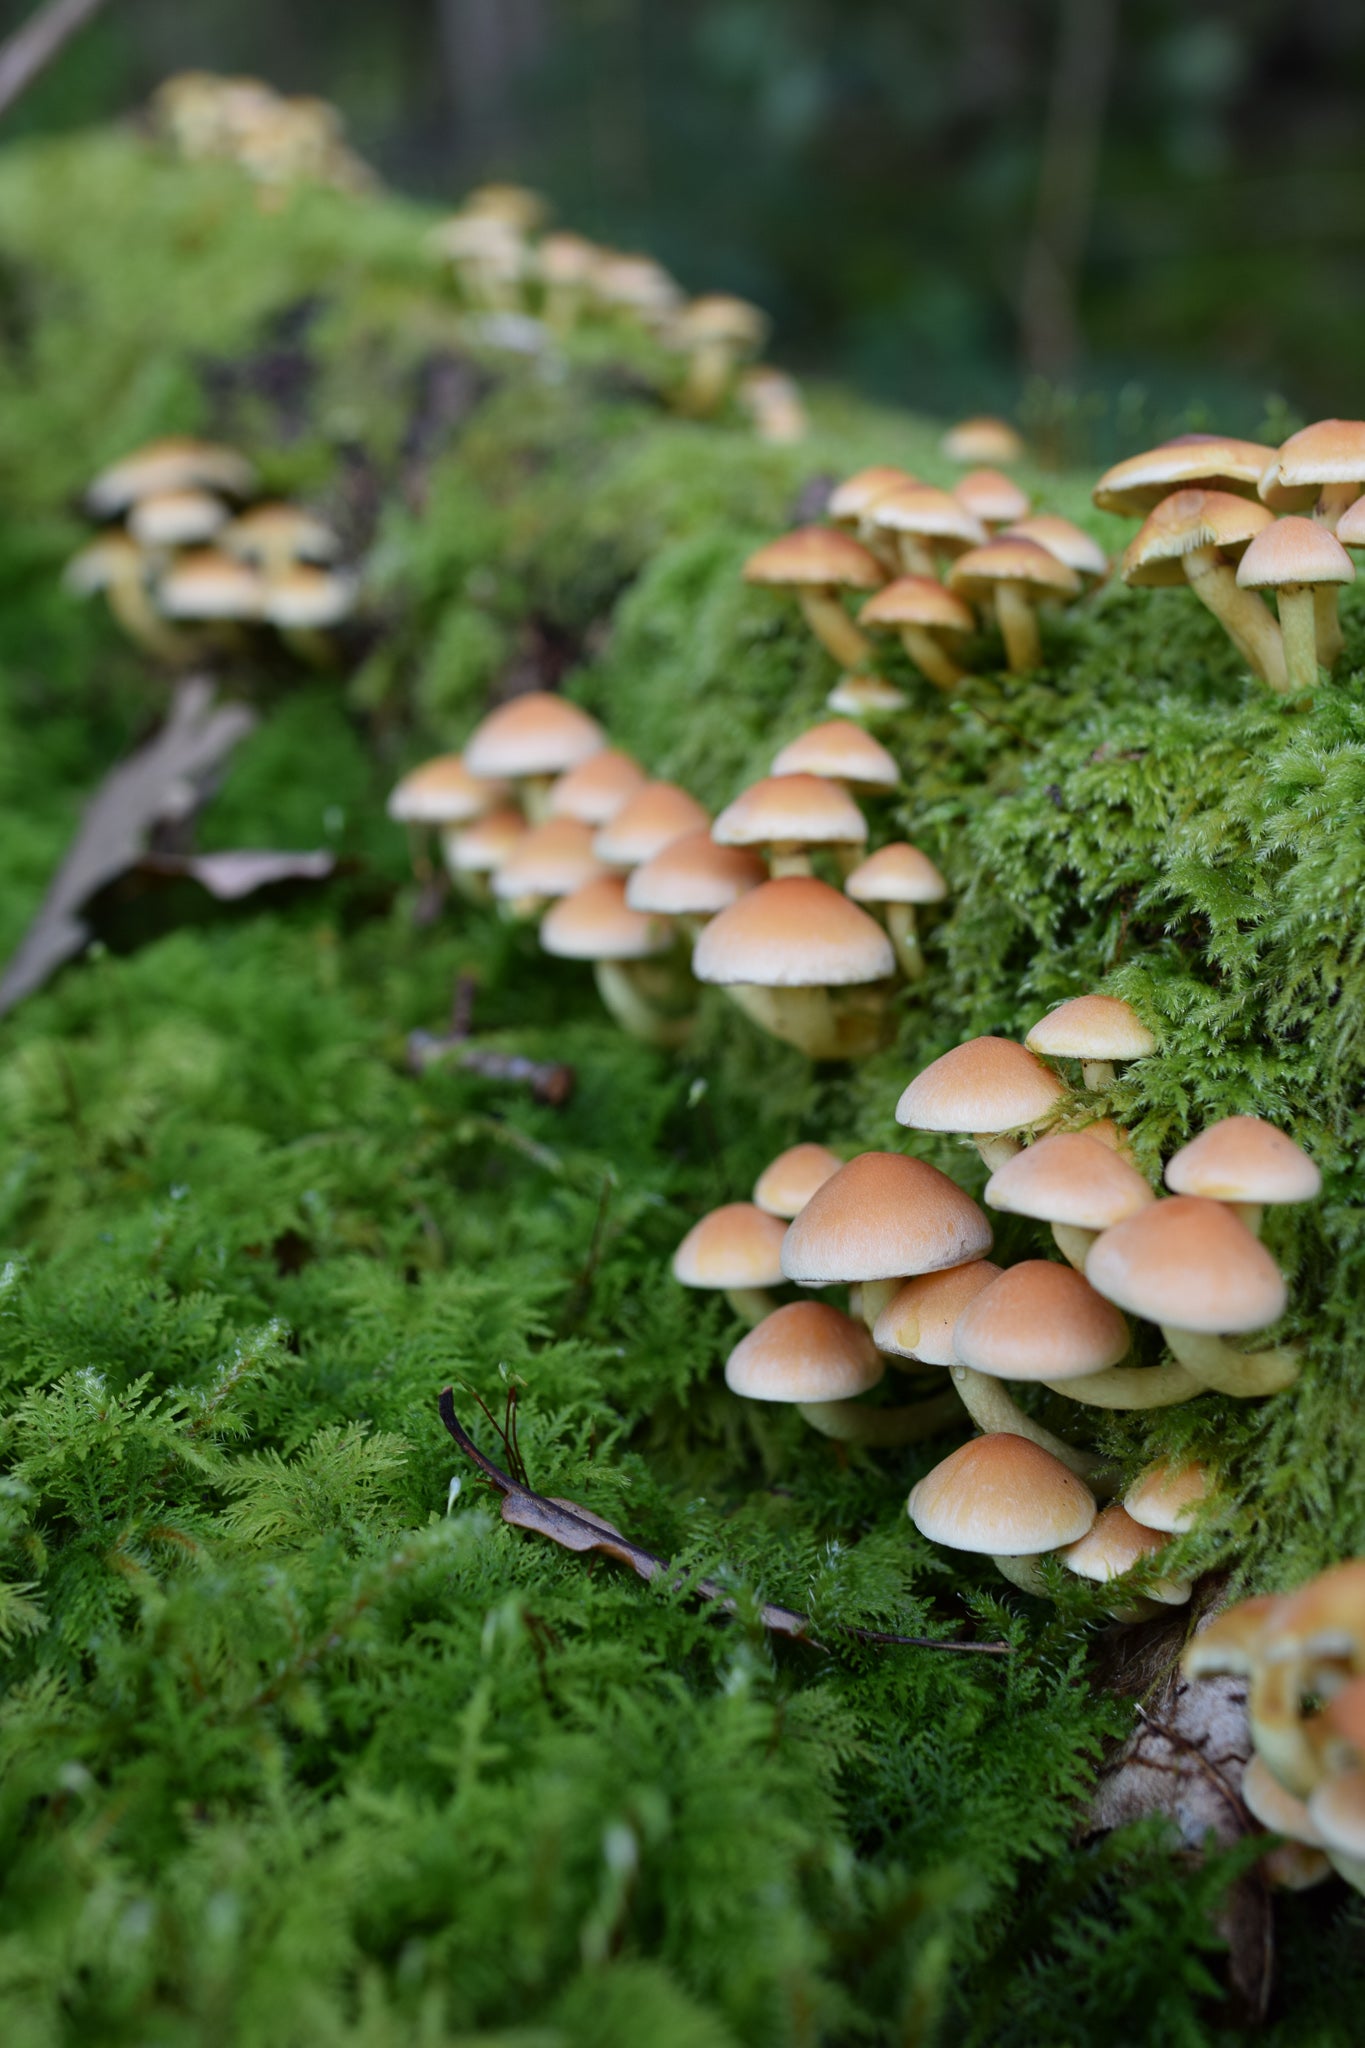 sulphur tufts toadstools growing on a mossy log